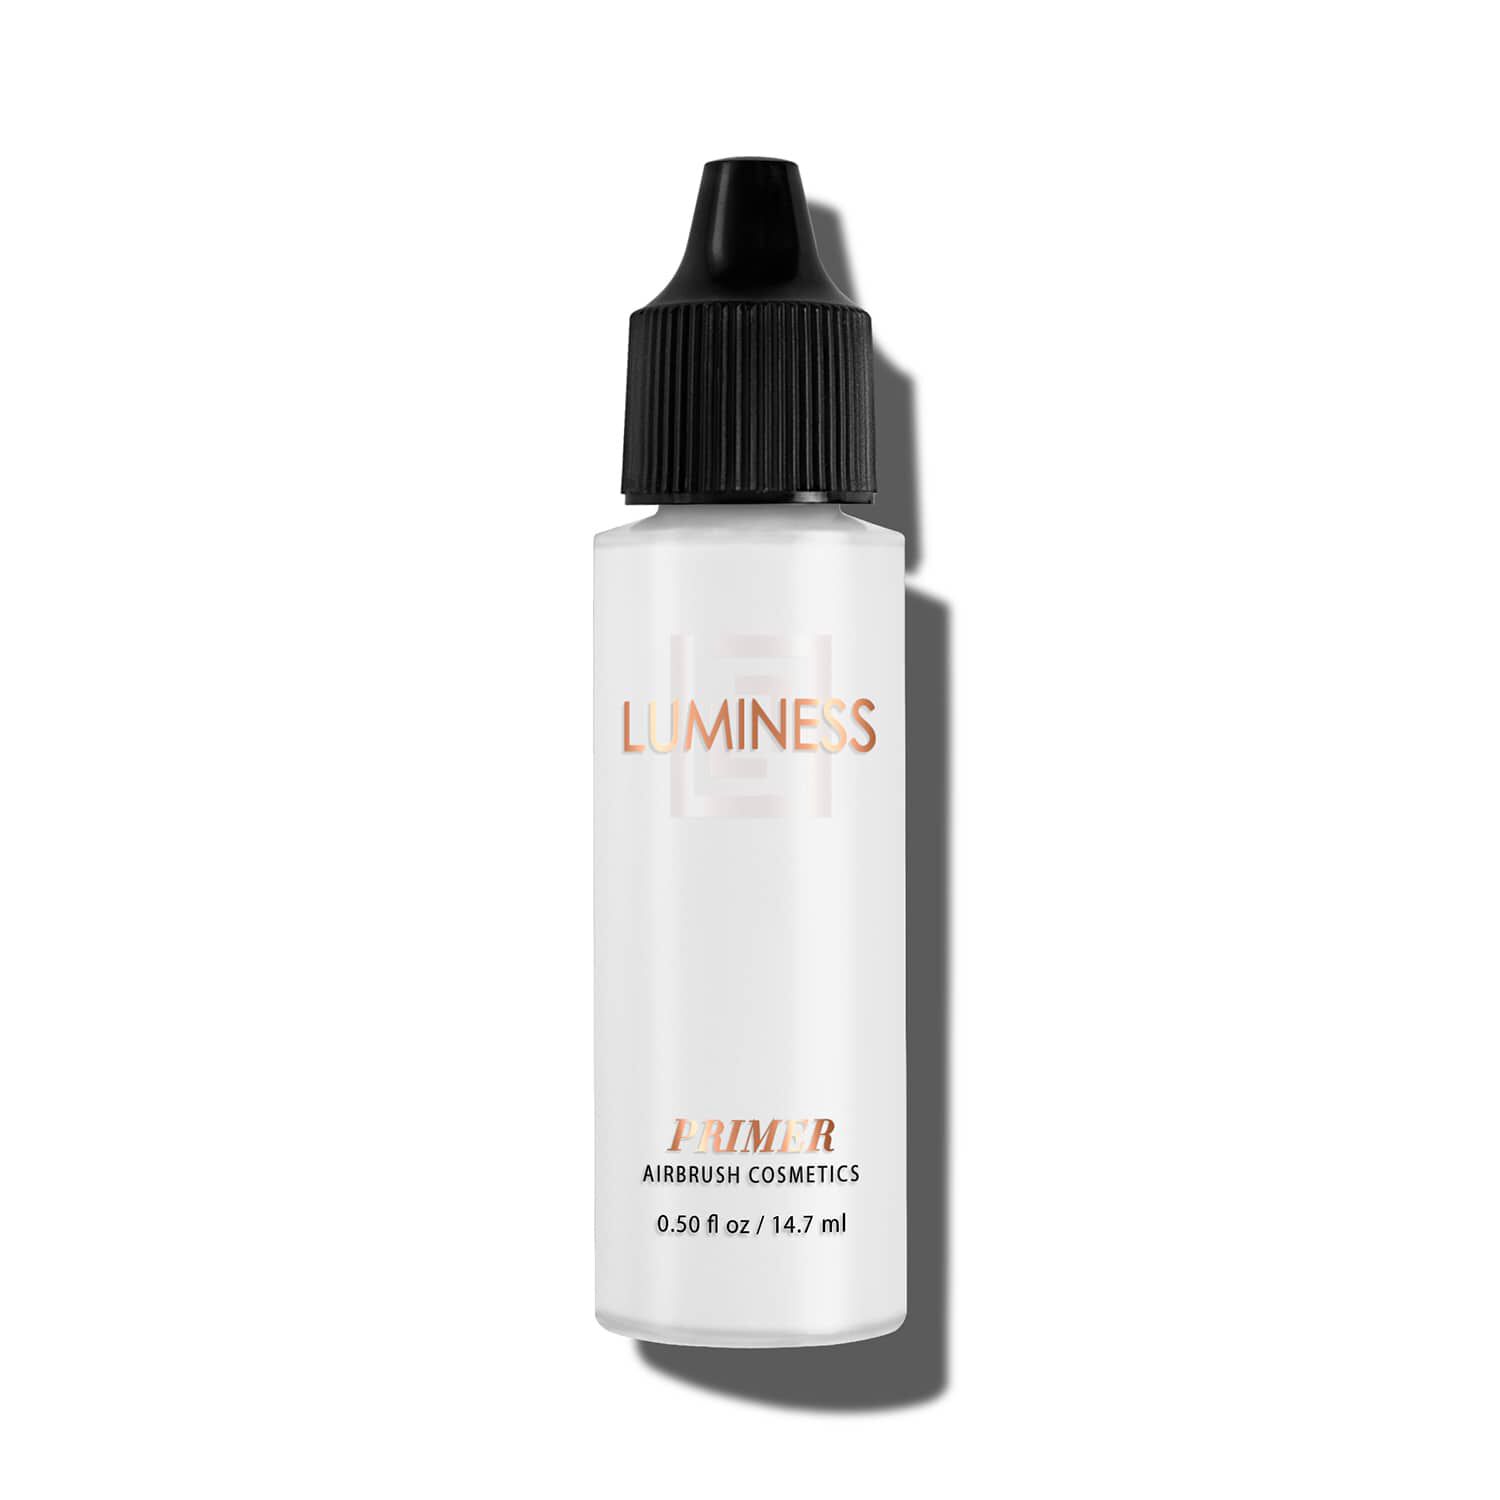 Luminess Scheduled To Debut Newest Airbrush Innovation On QVC